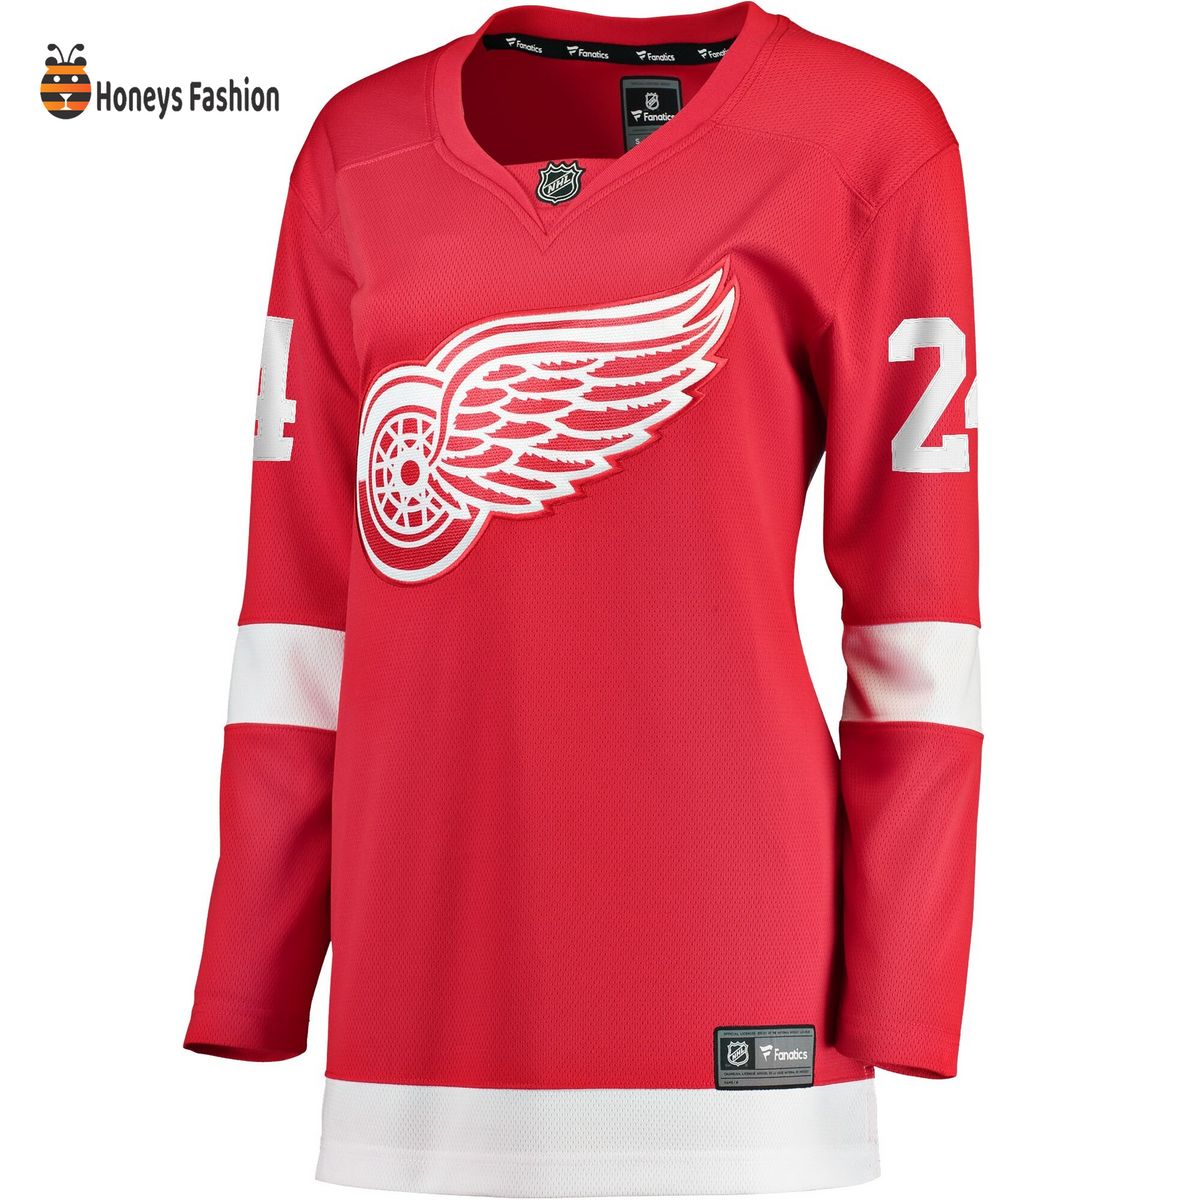 Women’s Detroit Red Wings Pius Suter Red Home Breakaway Player Jersey